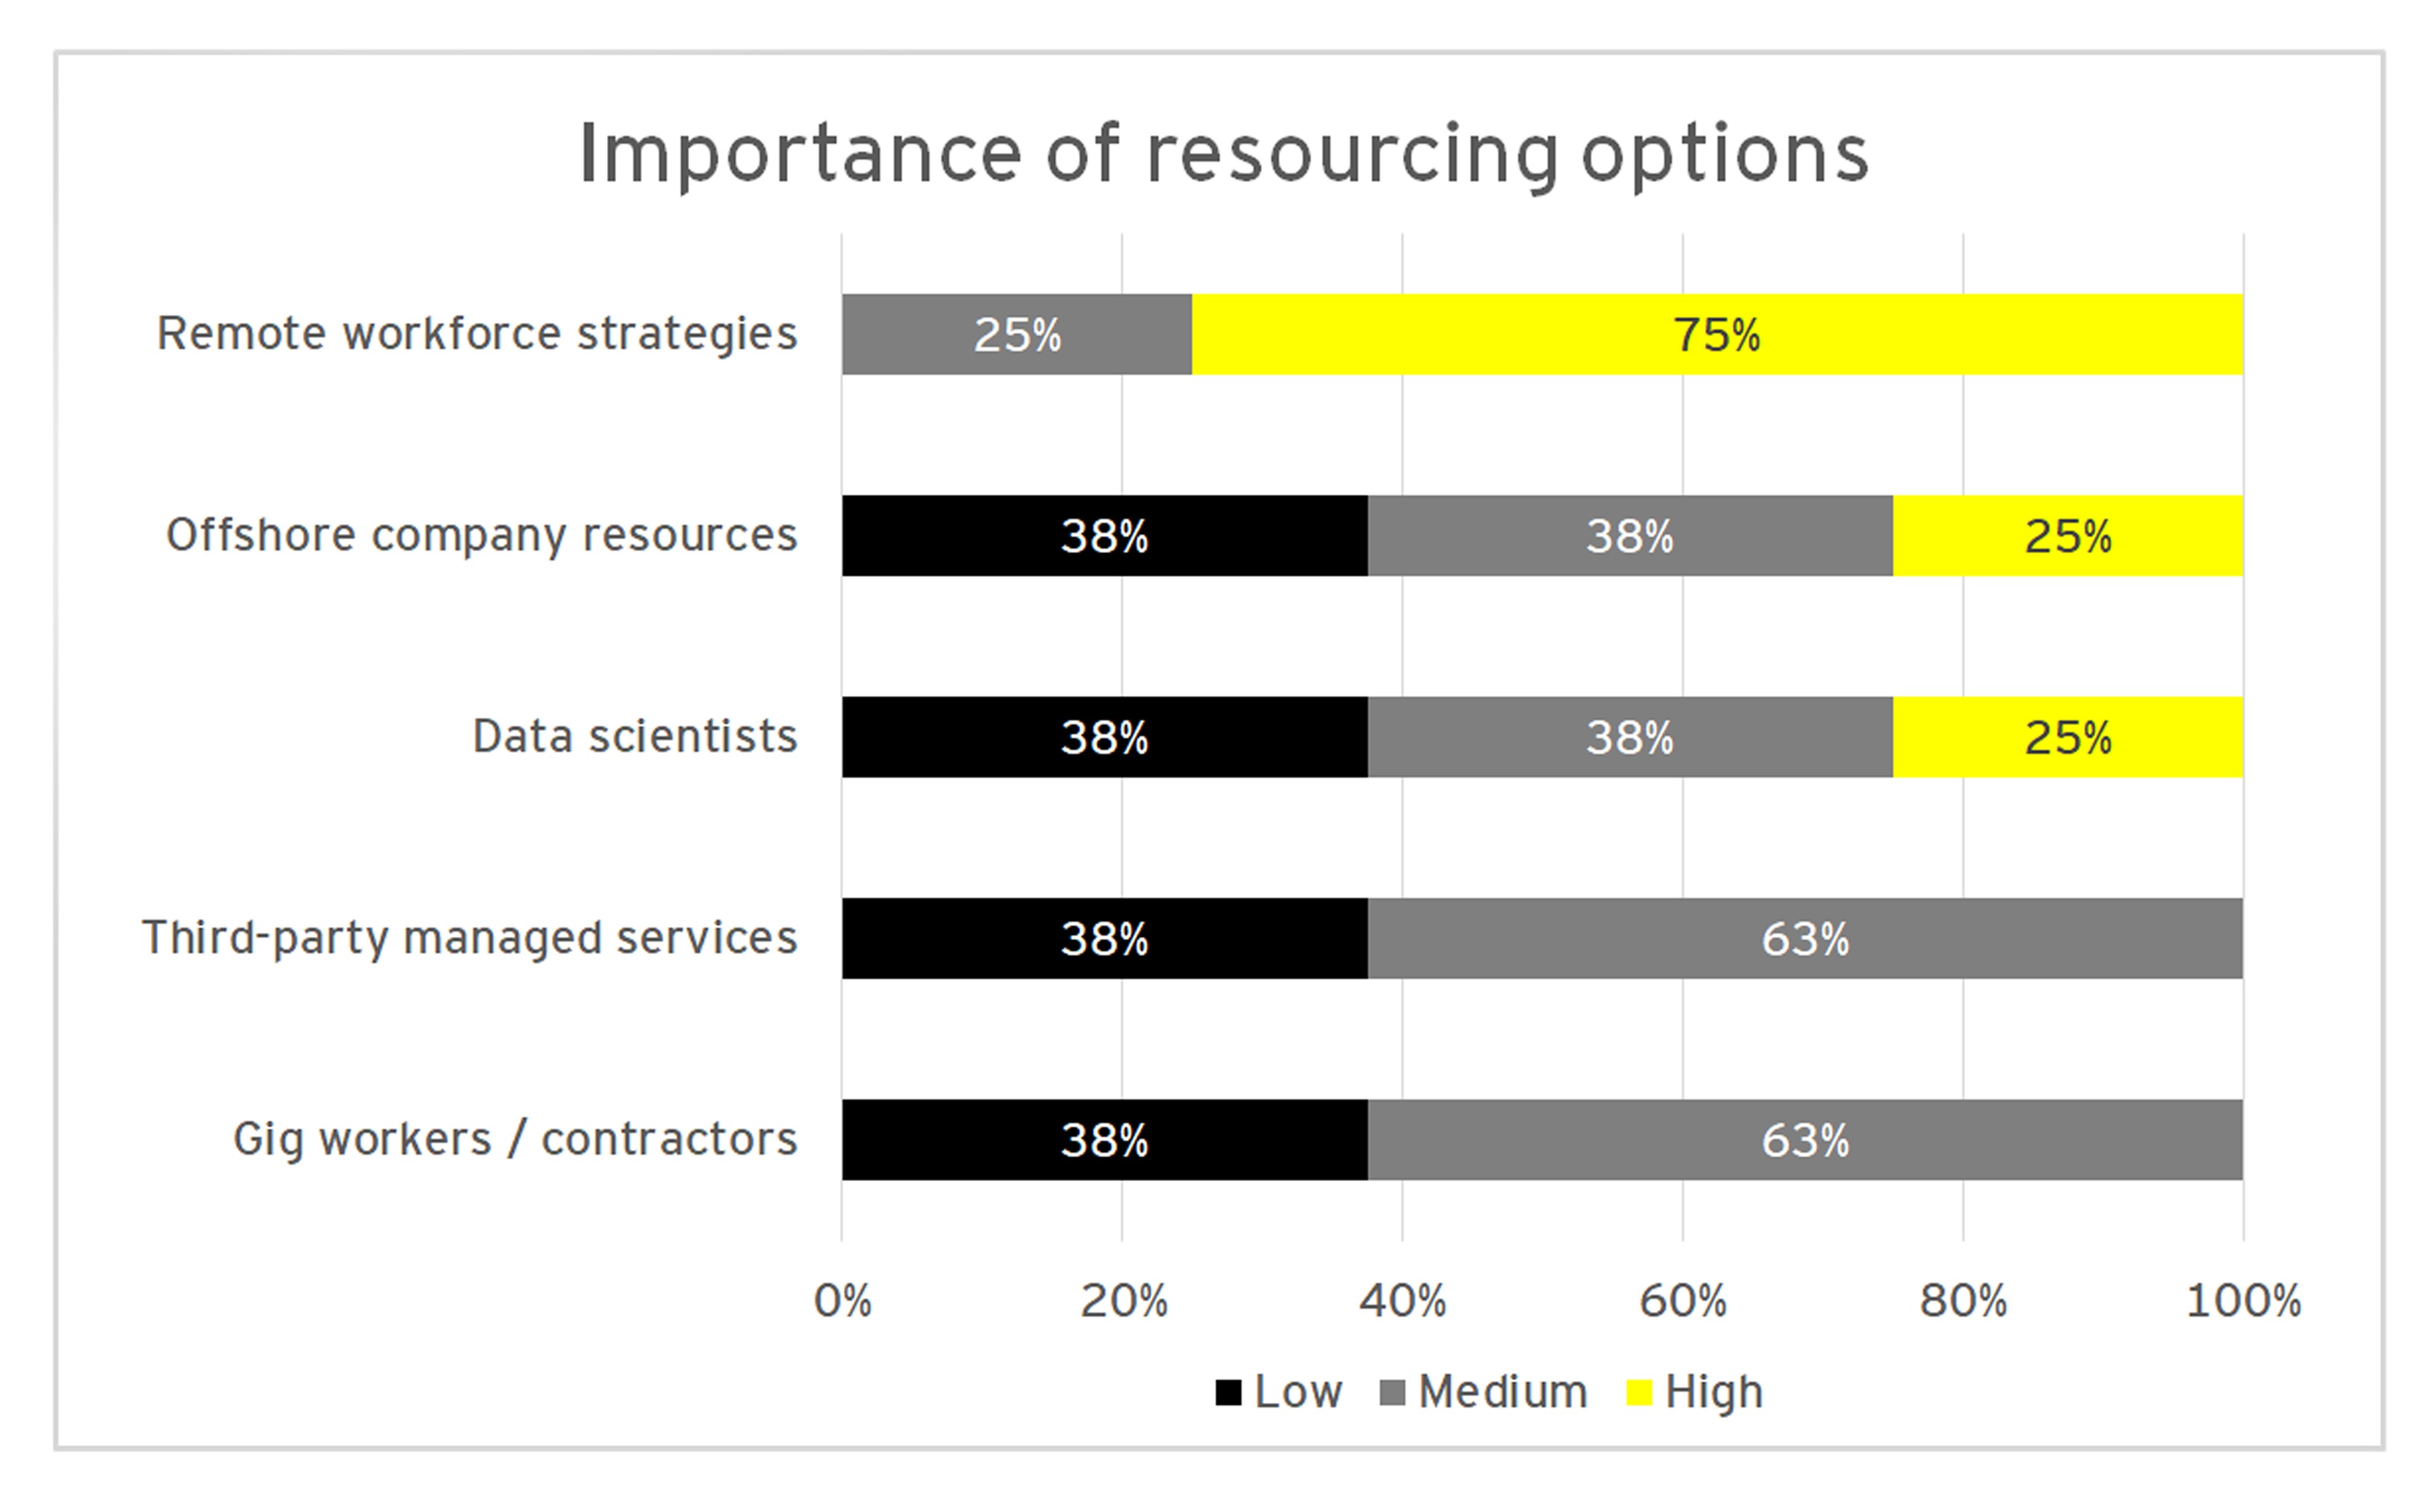 Importance of resourcing options chart